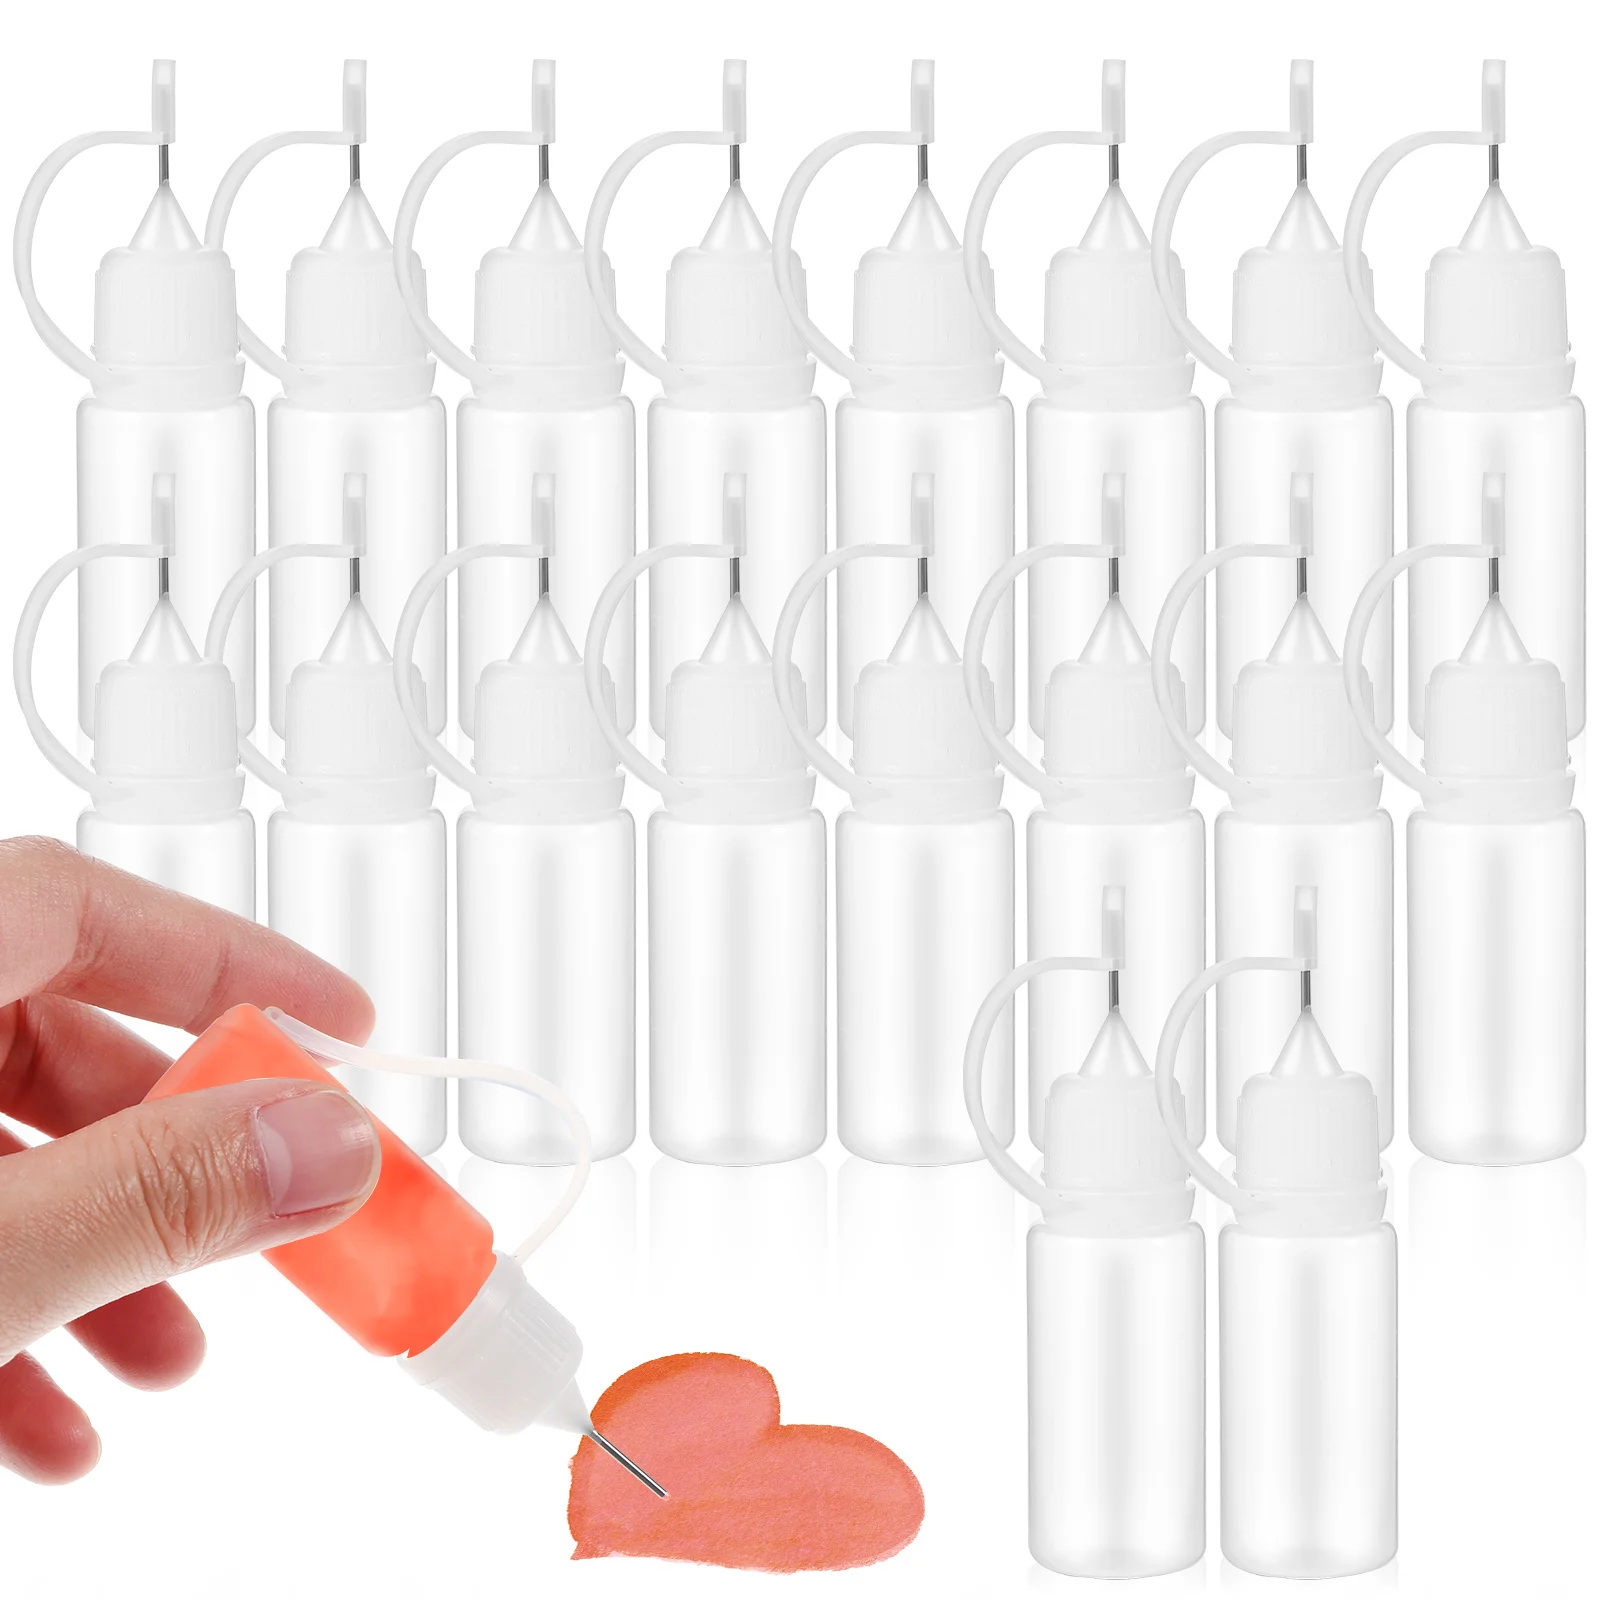 

20 Pcs Needle Tip Bottles Glue Shakers Precision Tip Applicator Bottles For Diy Quilling Craft Gluing Projects